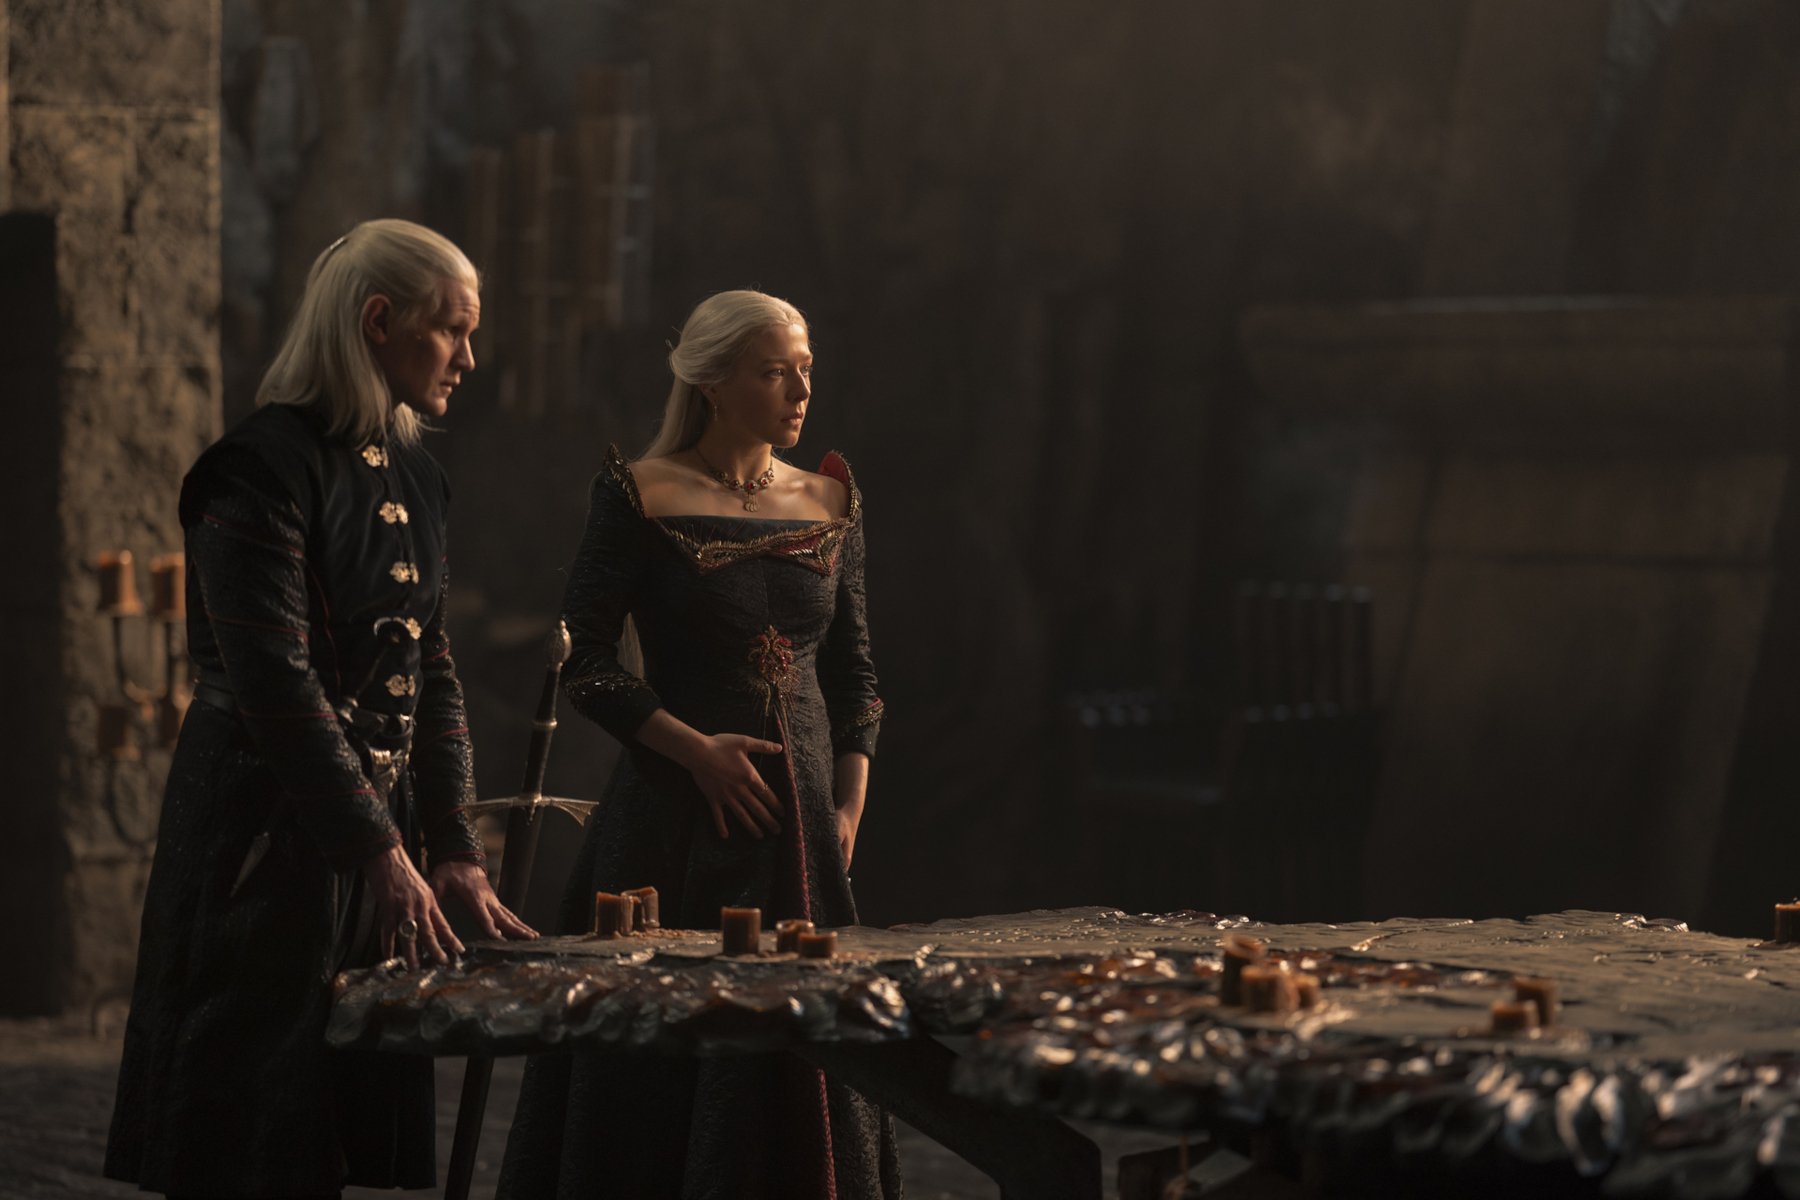 Matt Smith and Emma D'Arcy as Daemon and Rhaenyra Targaryen in 'House of the Dragon' Season 1, which kicks off the Dance of the Dragons. They're standing at the head of a table together.